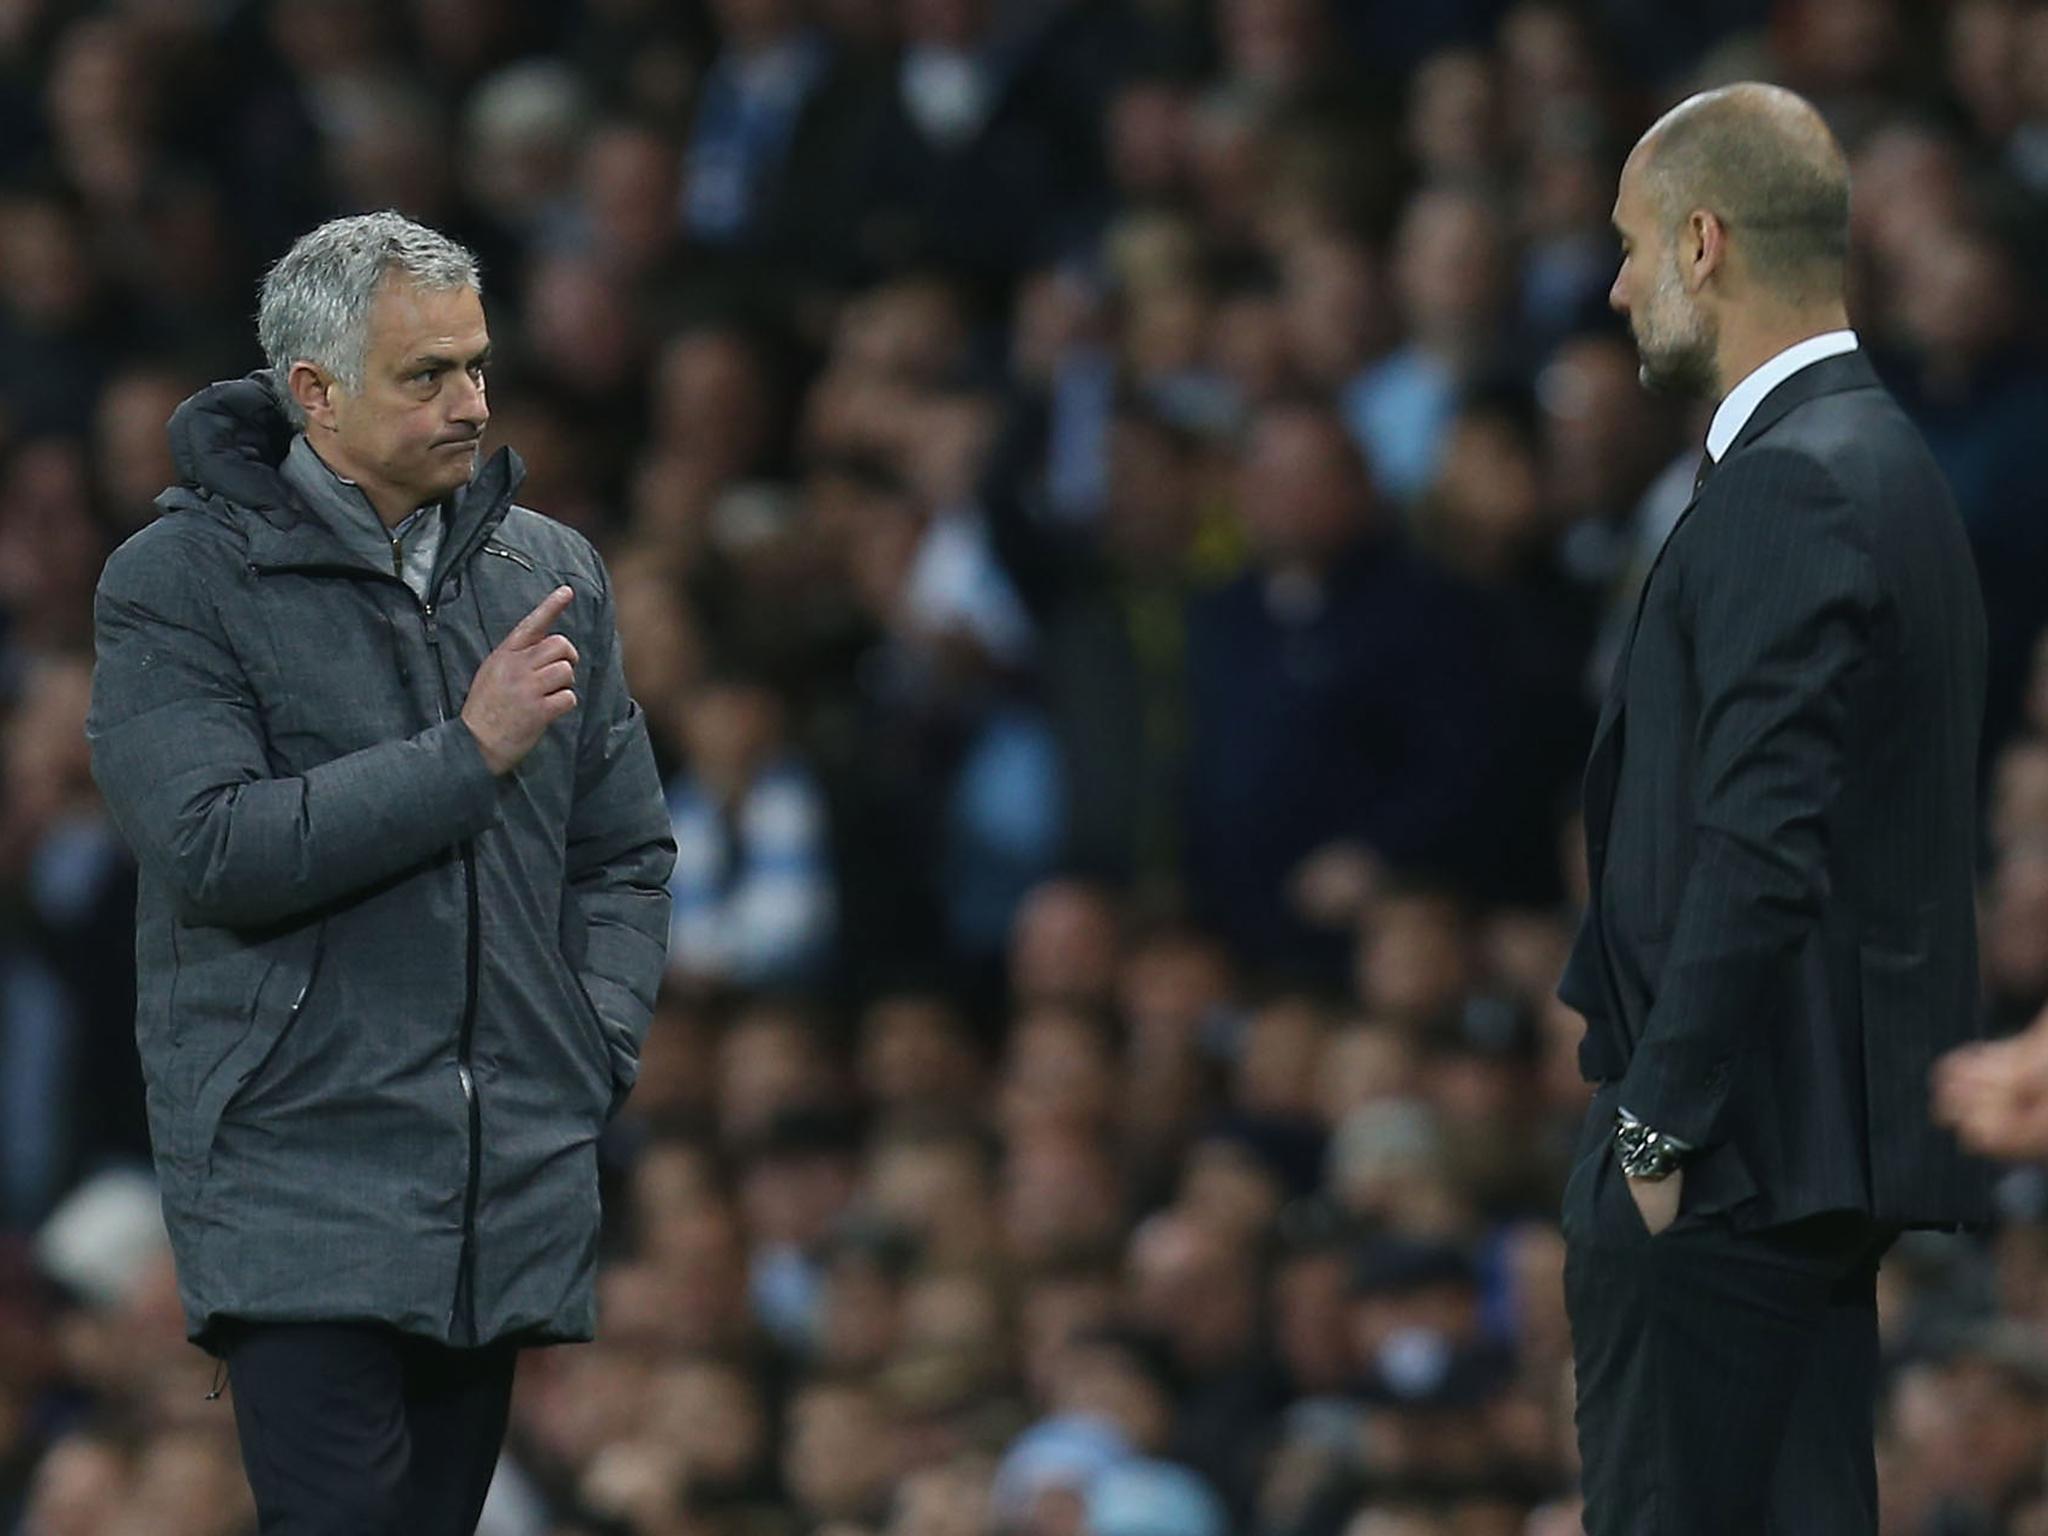 Manchester United will not allow Manchester City to film a documentary at Sunday's derby